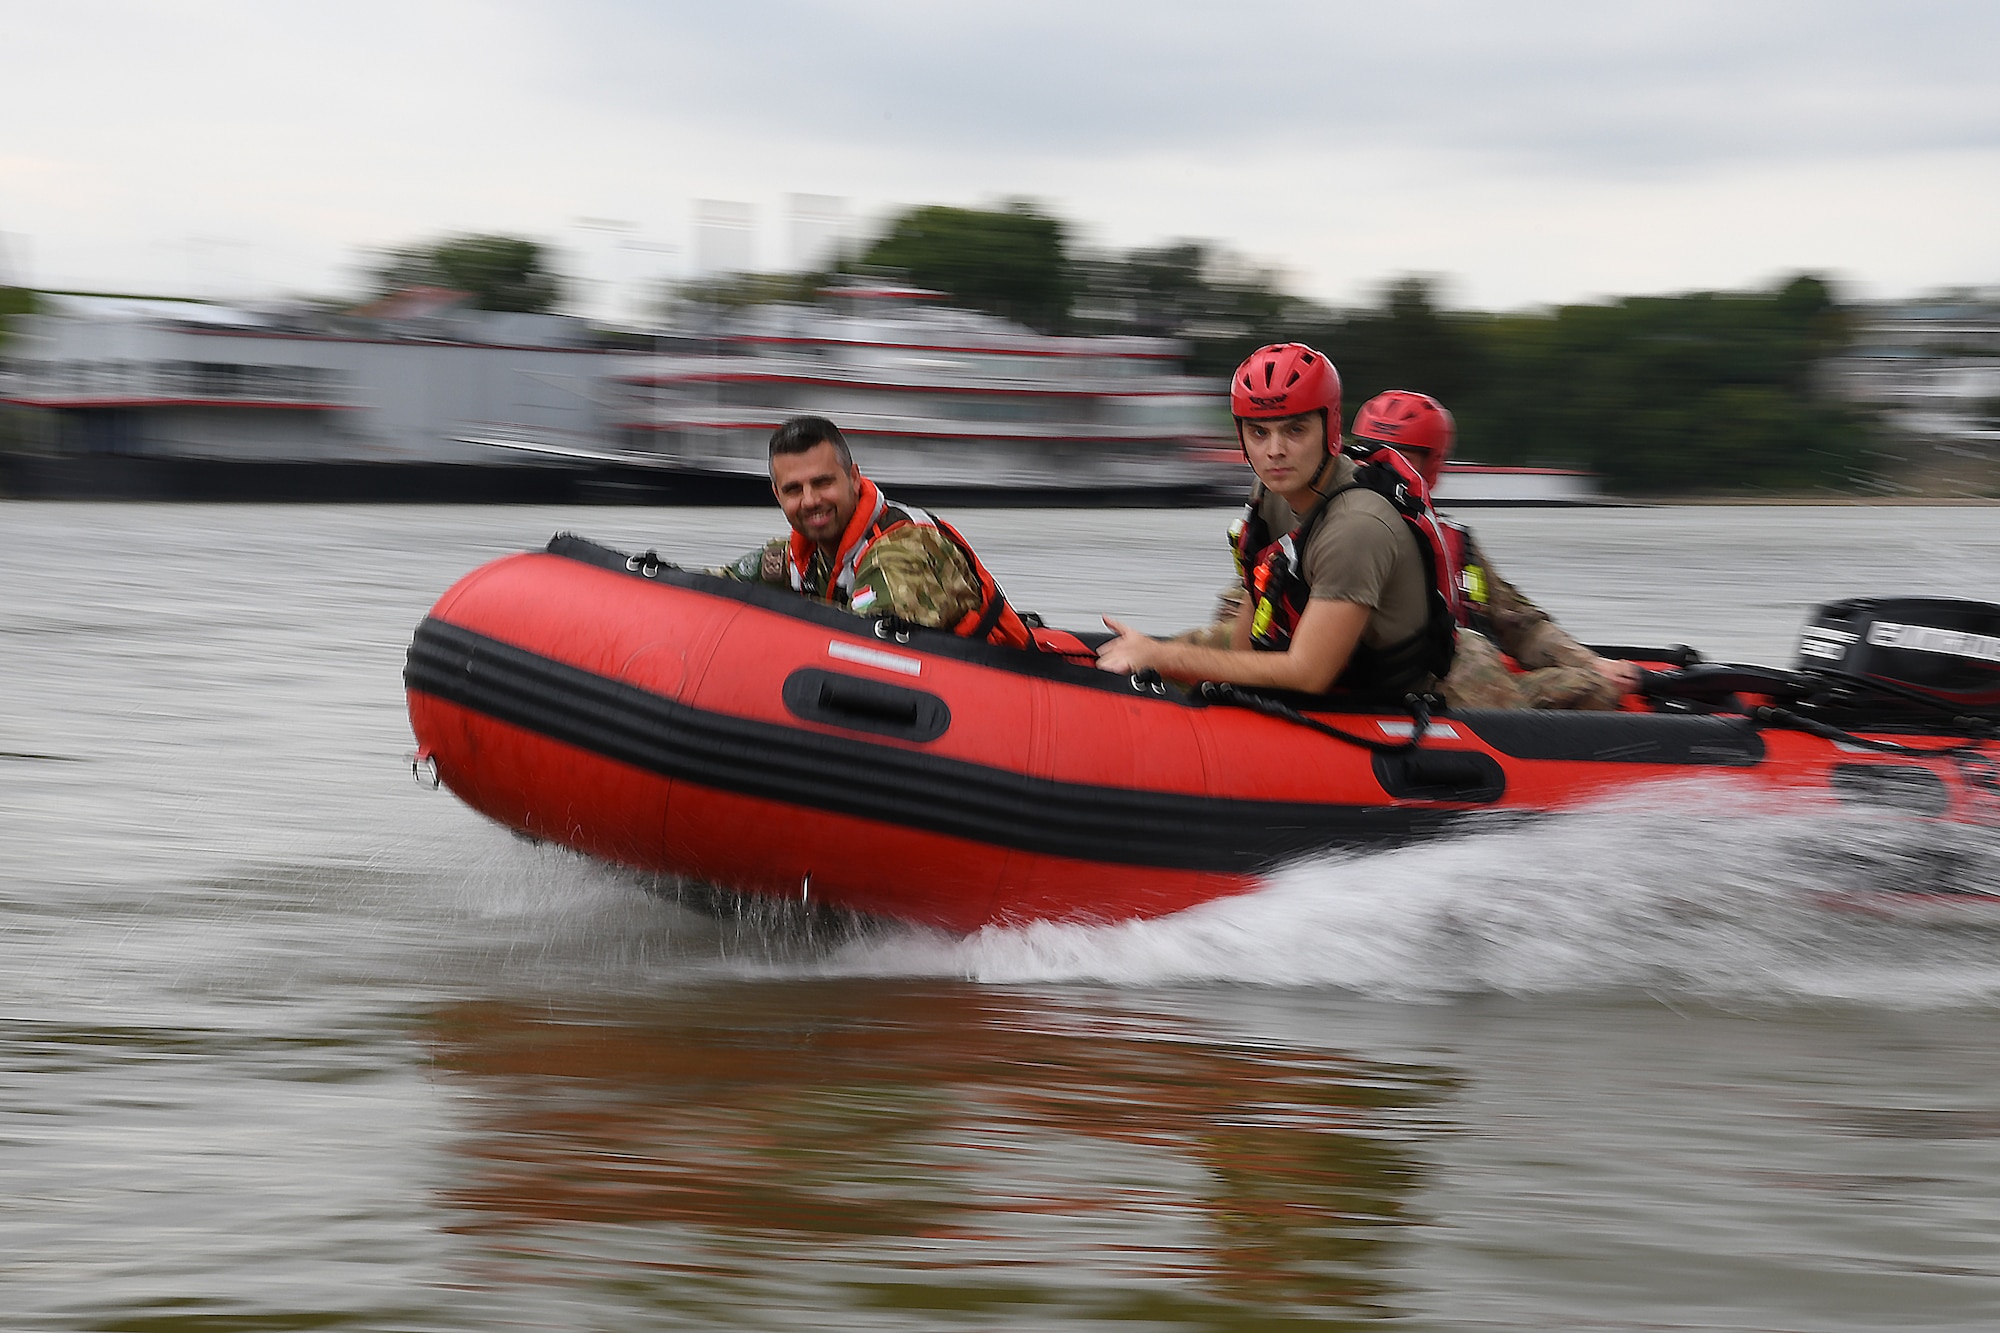 Airmen assigned to the Ohio National Guard's 178th Wing demonstrate their water rescue skills and capabilities Sept. 15, 2021 for a Hungarian Defense Forces delegation on the Ohio River in Cincinnati.  The State Partnership Program between the Ohio National Guard and Hungary enhances joint training, builds cultural understanding and showcases the accomplishments of collaborating to achieve security cooperation goals.(U.S. Air National Guard photo by Shane Hughes)